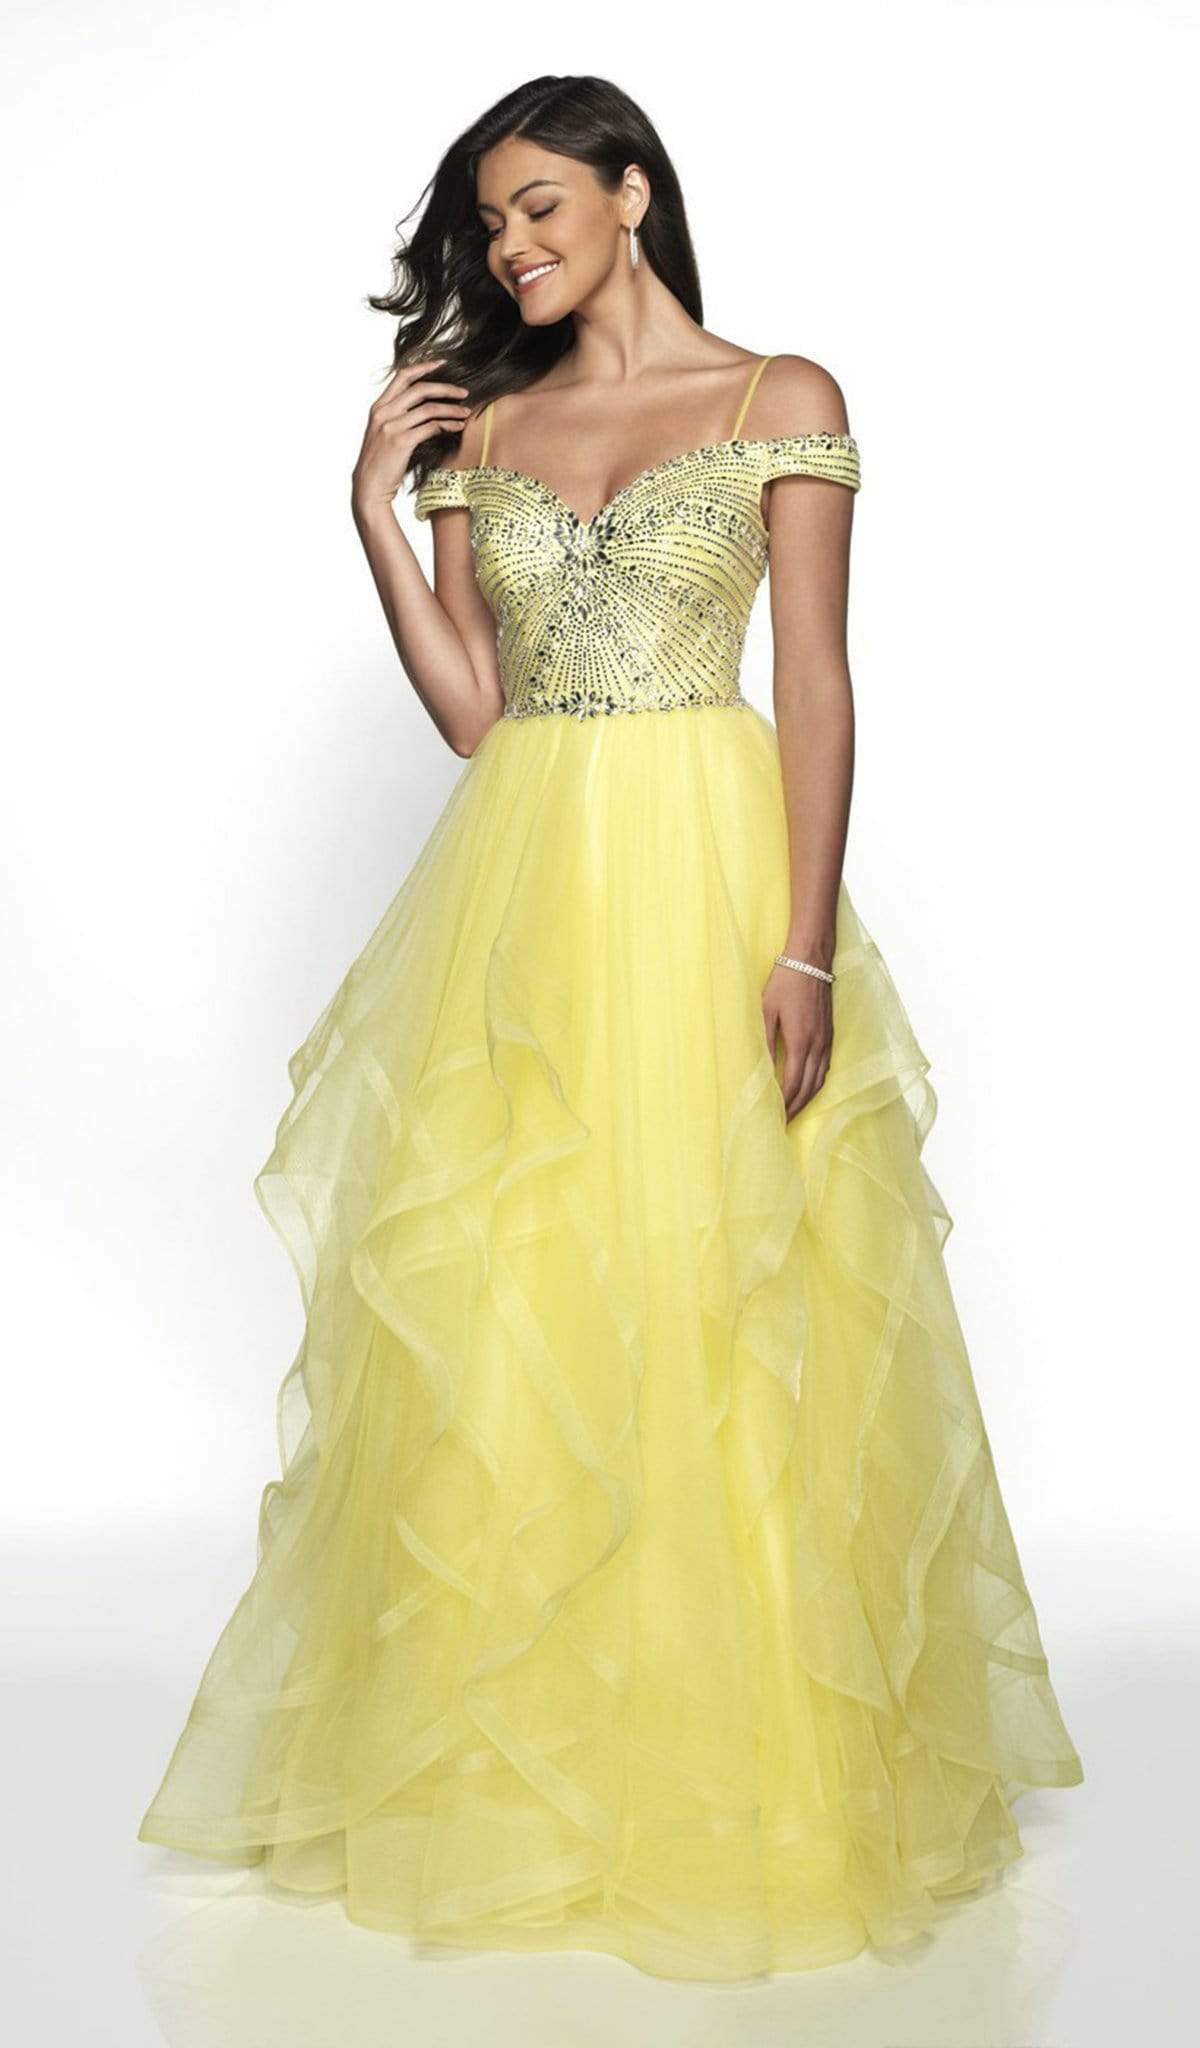 Blush by Alexia Designs - 5717 Off Shoulder Asymmetrical Tulle Gown Special Occasion Dress 0 / Lemon